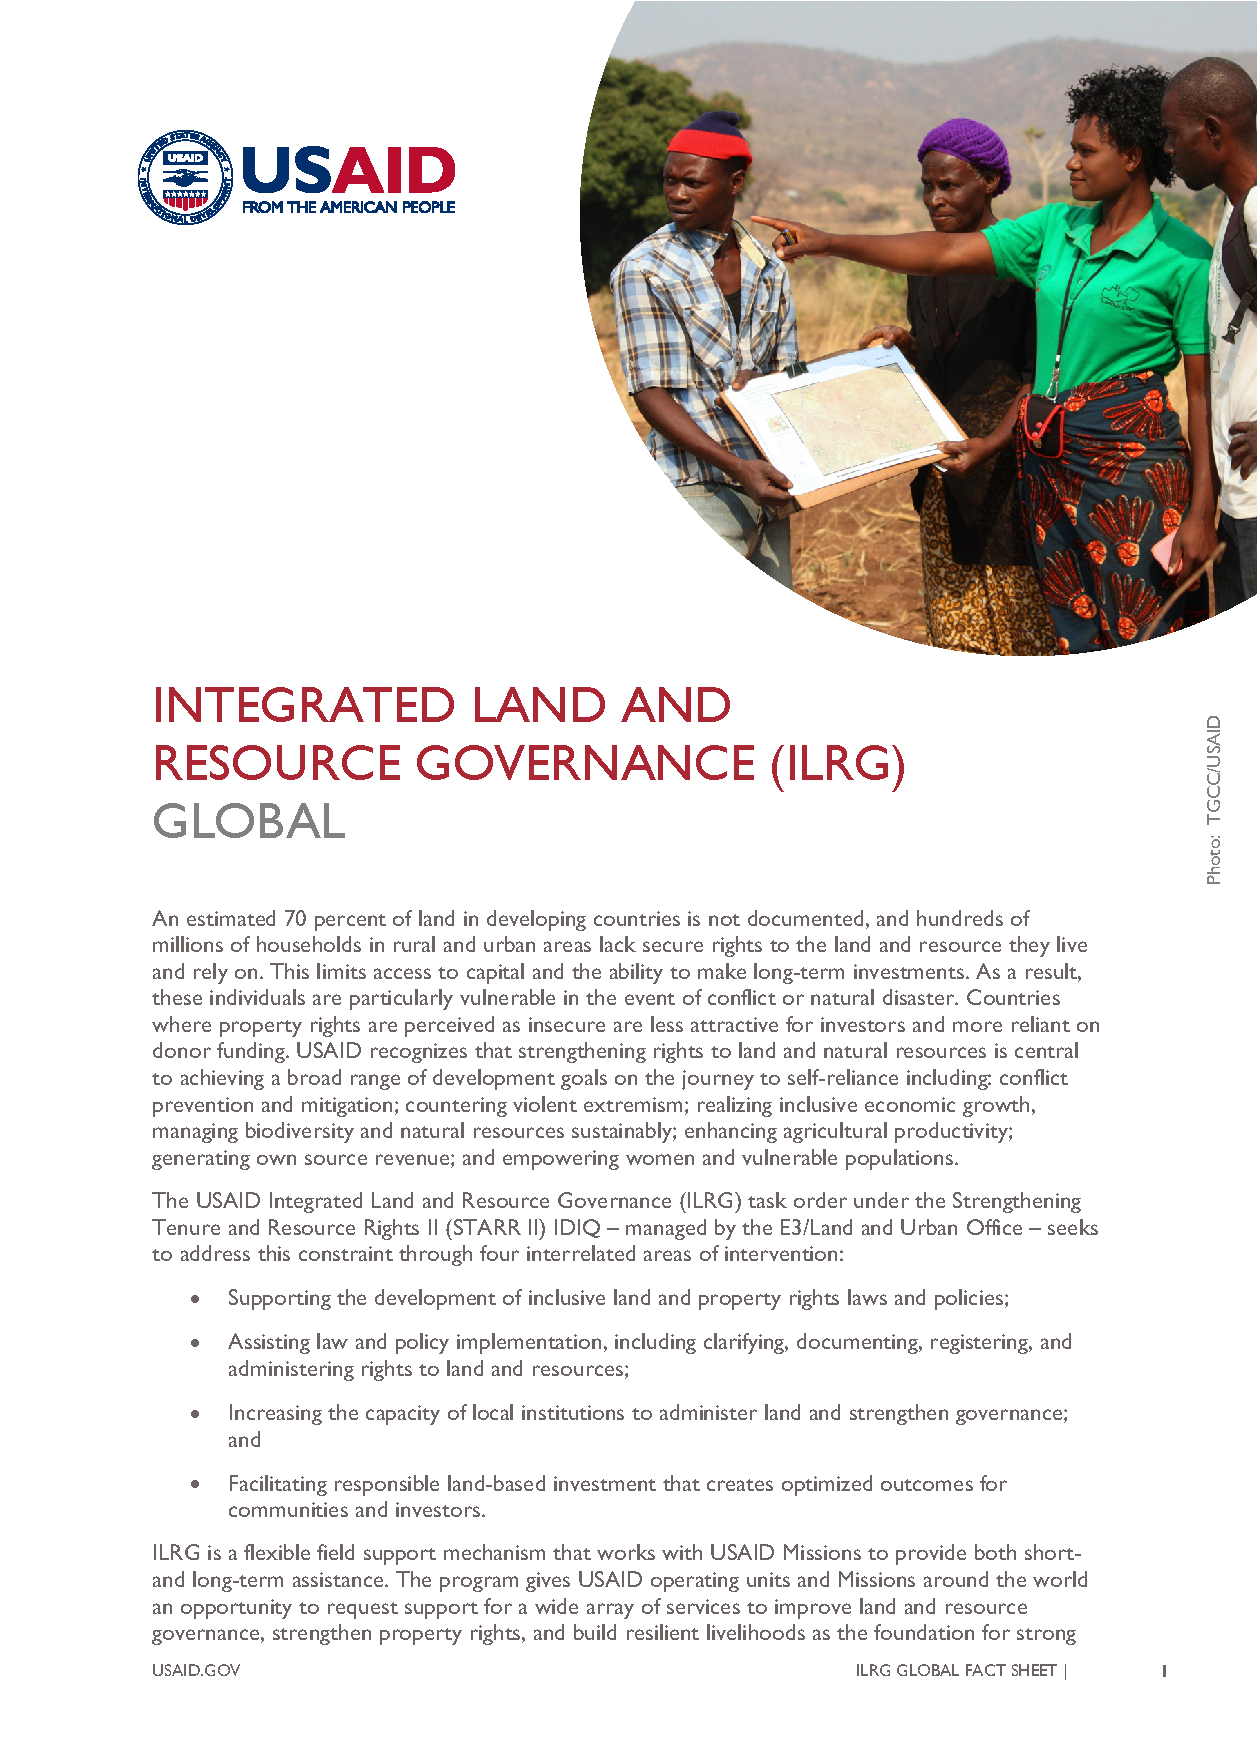 INTEGRATED LAND AND RESOURCE GOVERNANCE - GLOBAL - Fact Sheet